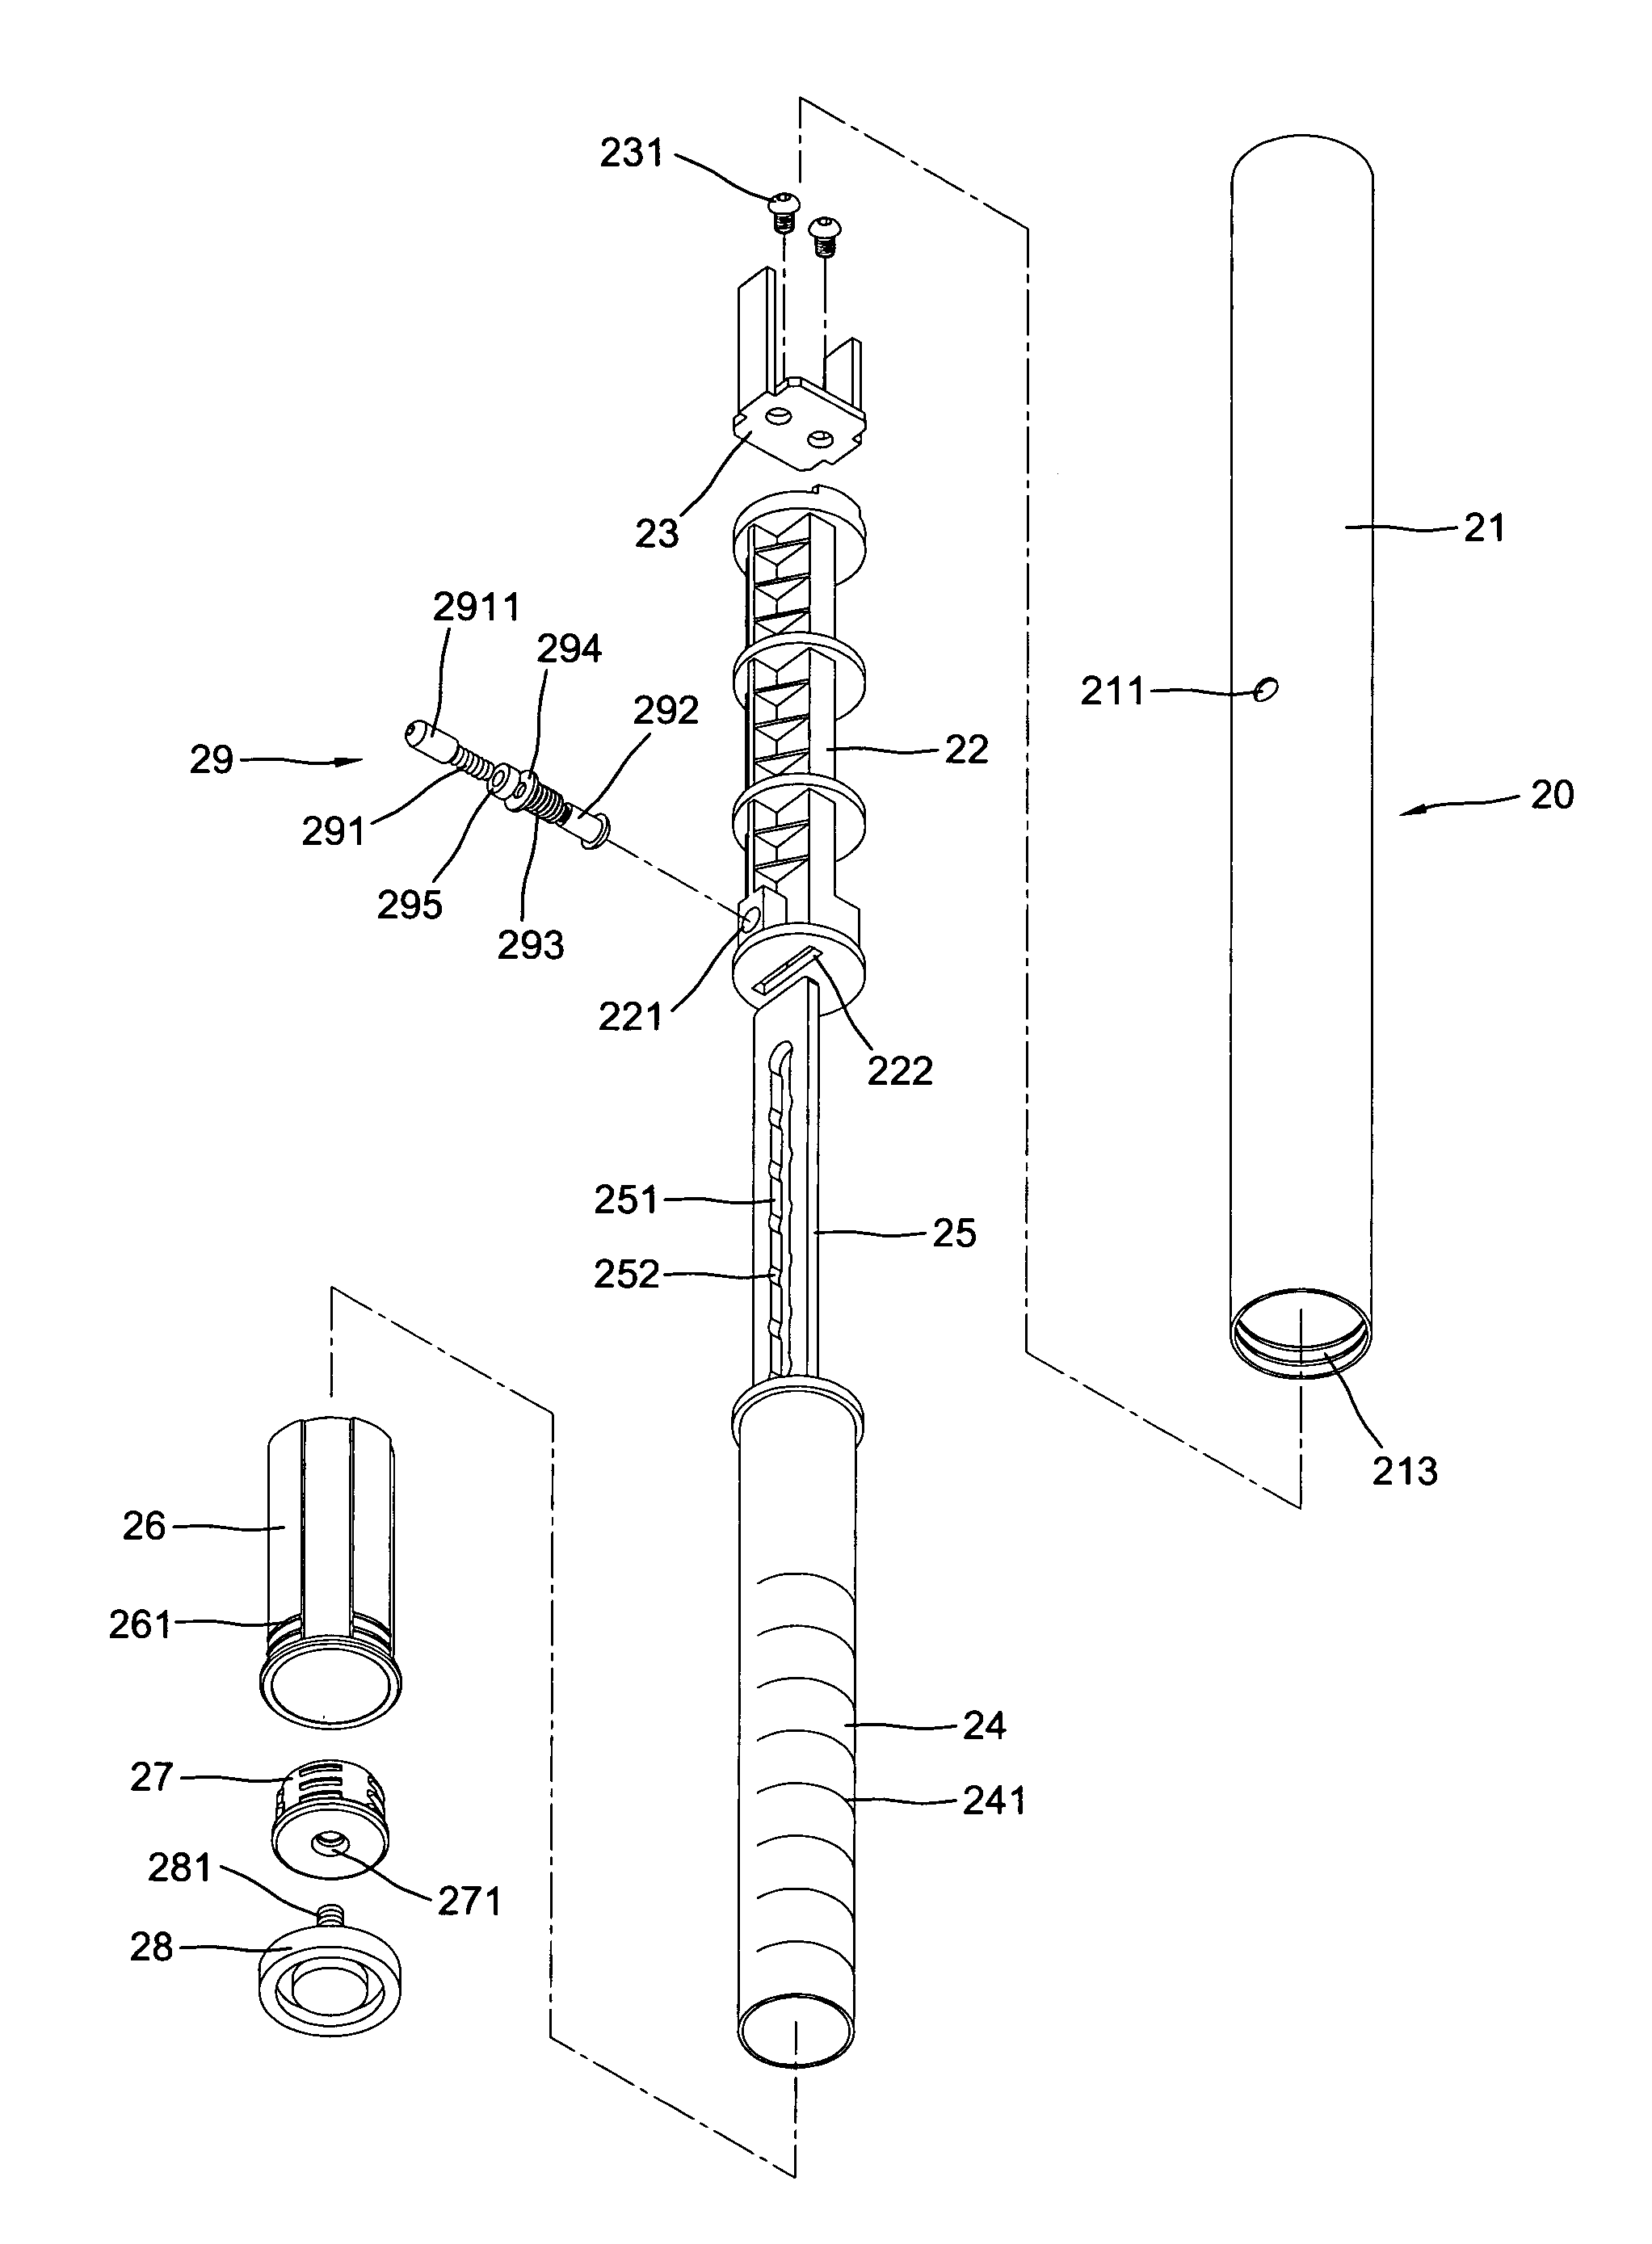 Elevation adjustment device in the legs of table